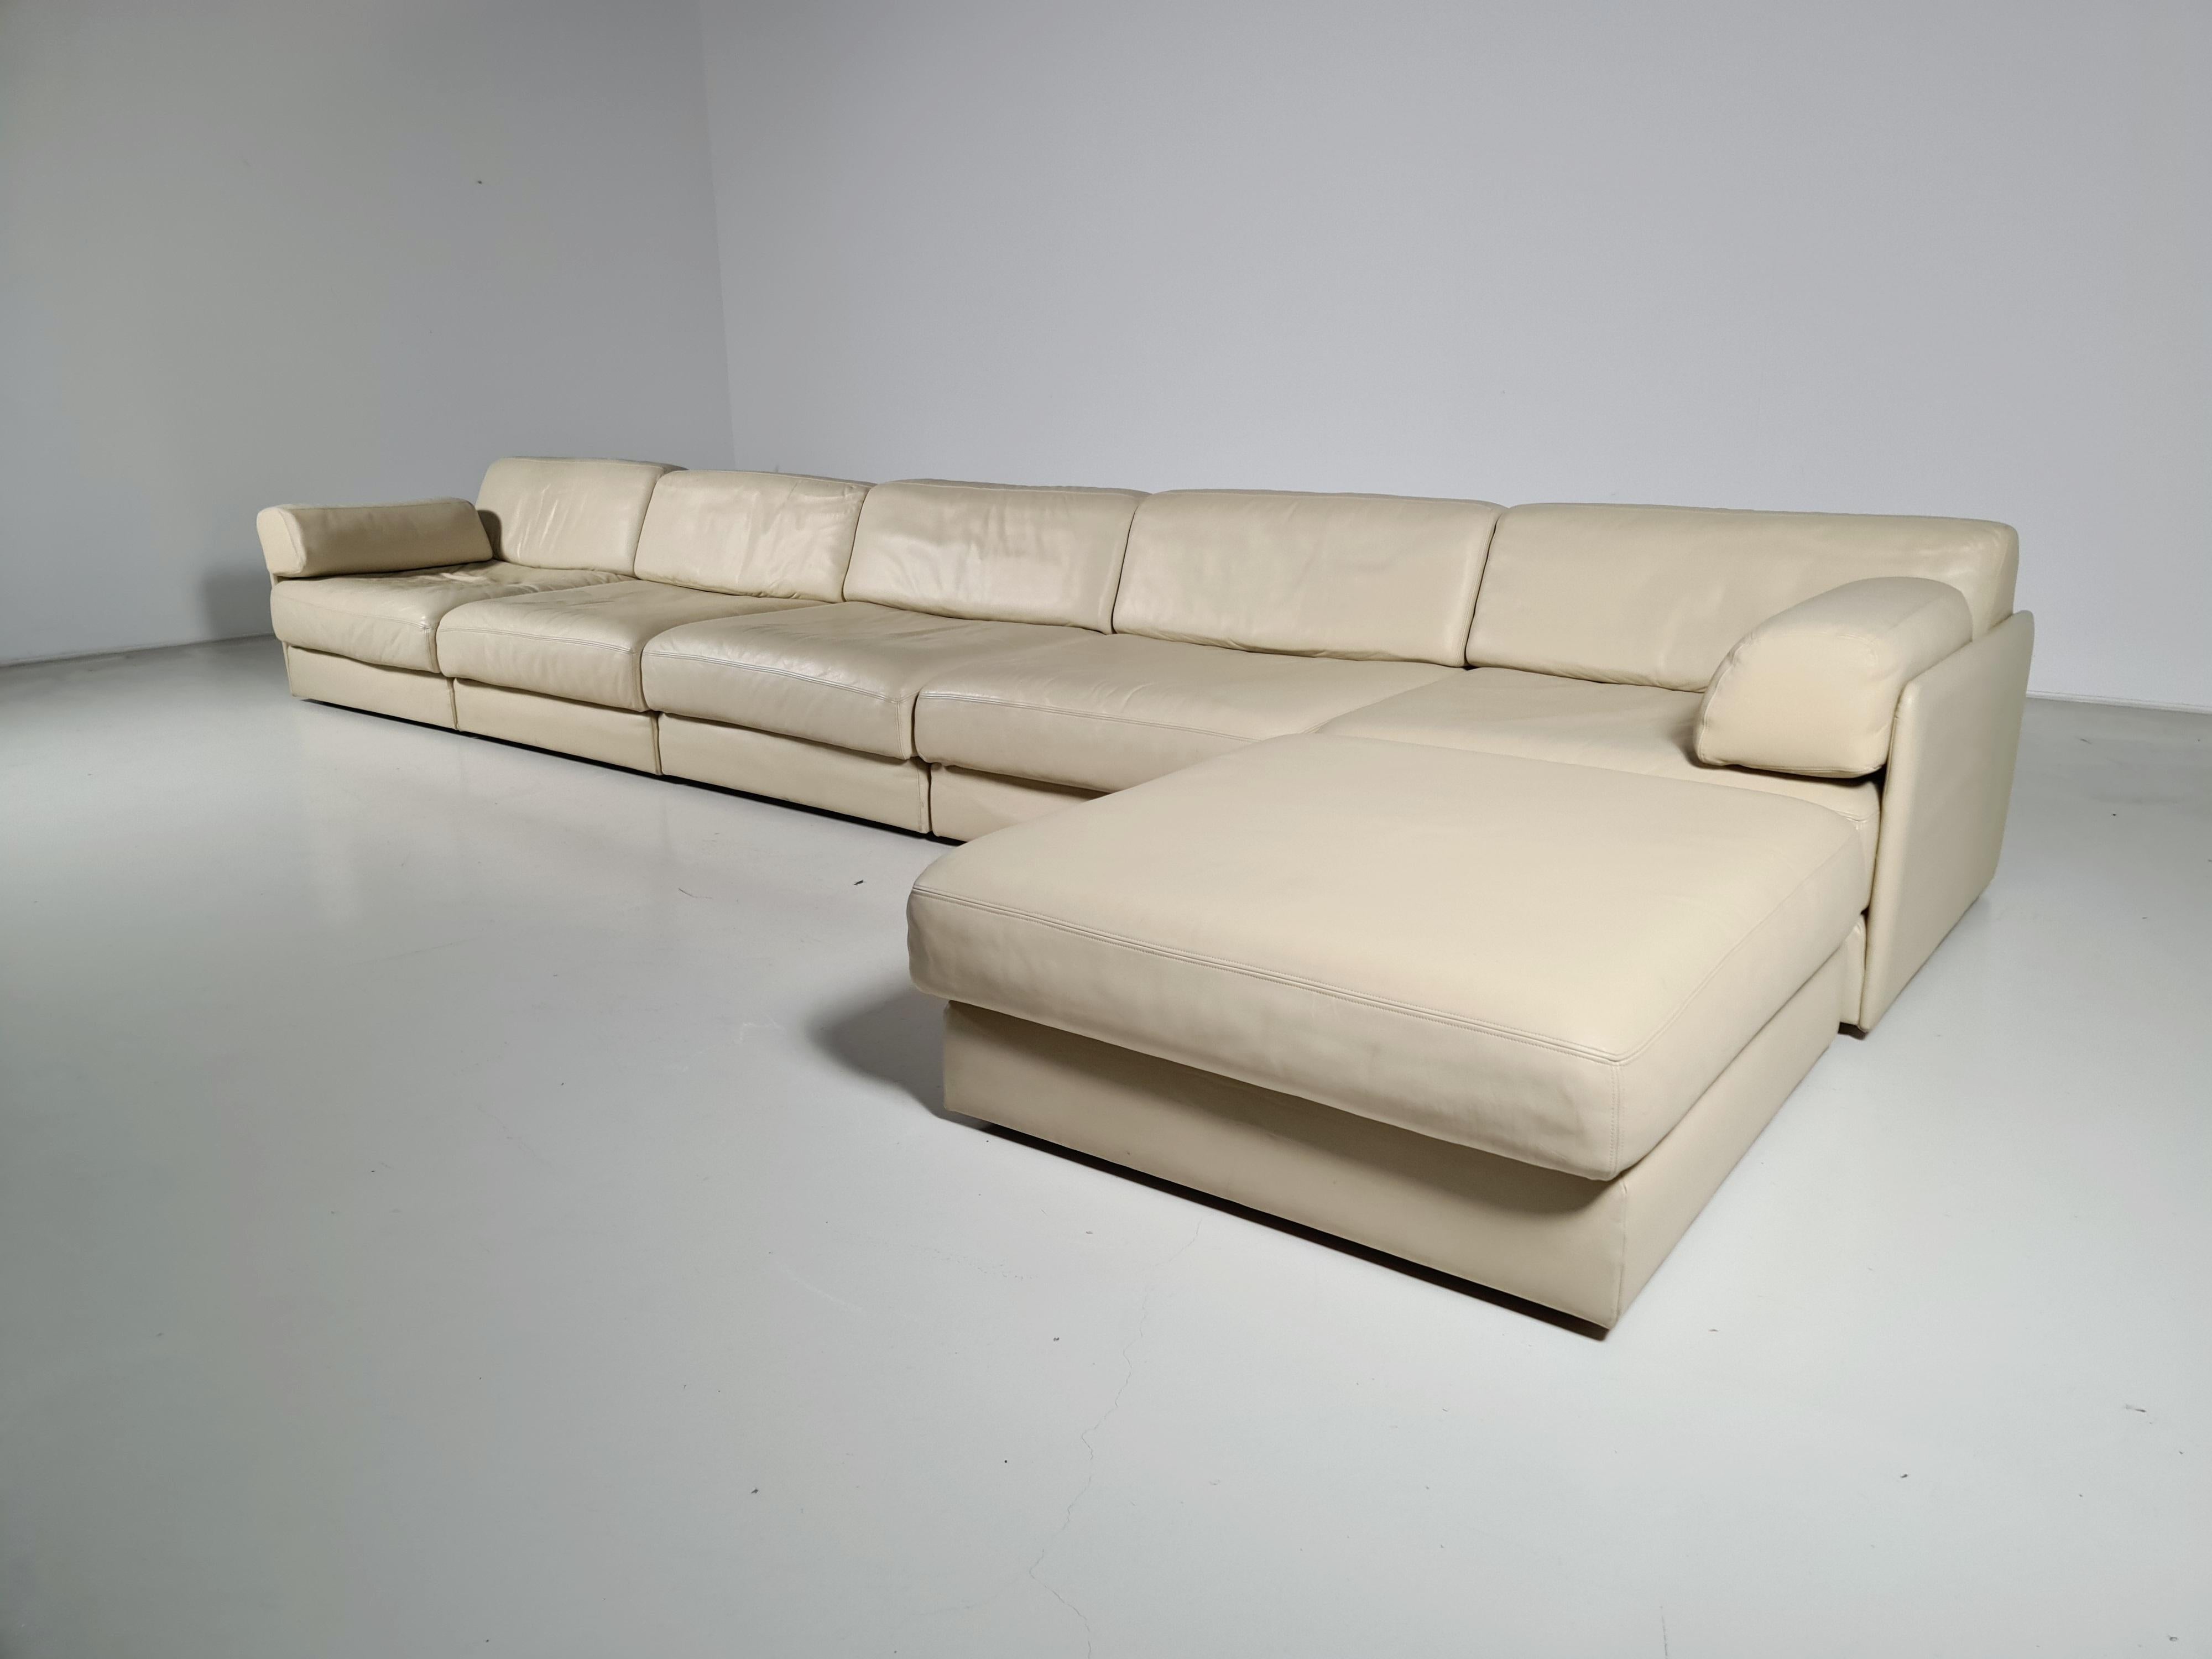 Beautiful 5-piece creme leather modular sofa with ottoman by De Sede from the 1970s. The sofa can be converted into a guest bed in just a few simple steps. Extremely comfortable with a nice patina. Many different settings are possible.